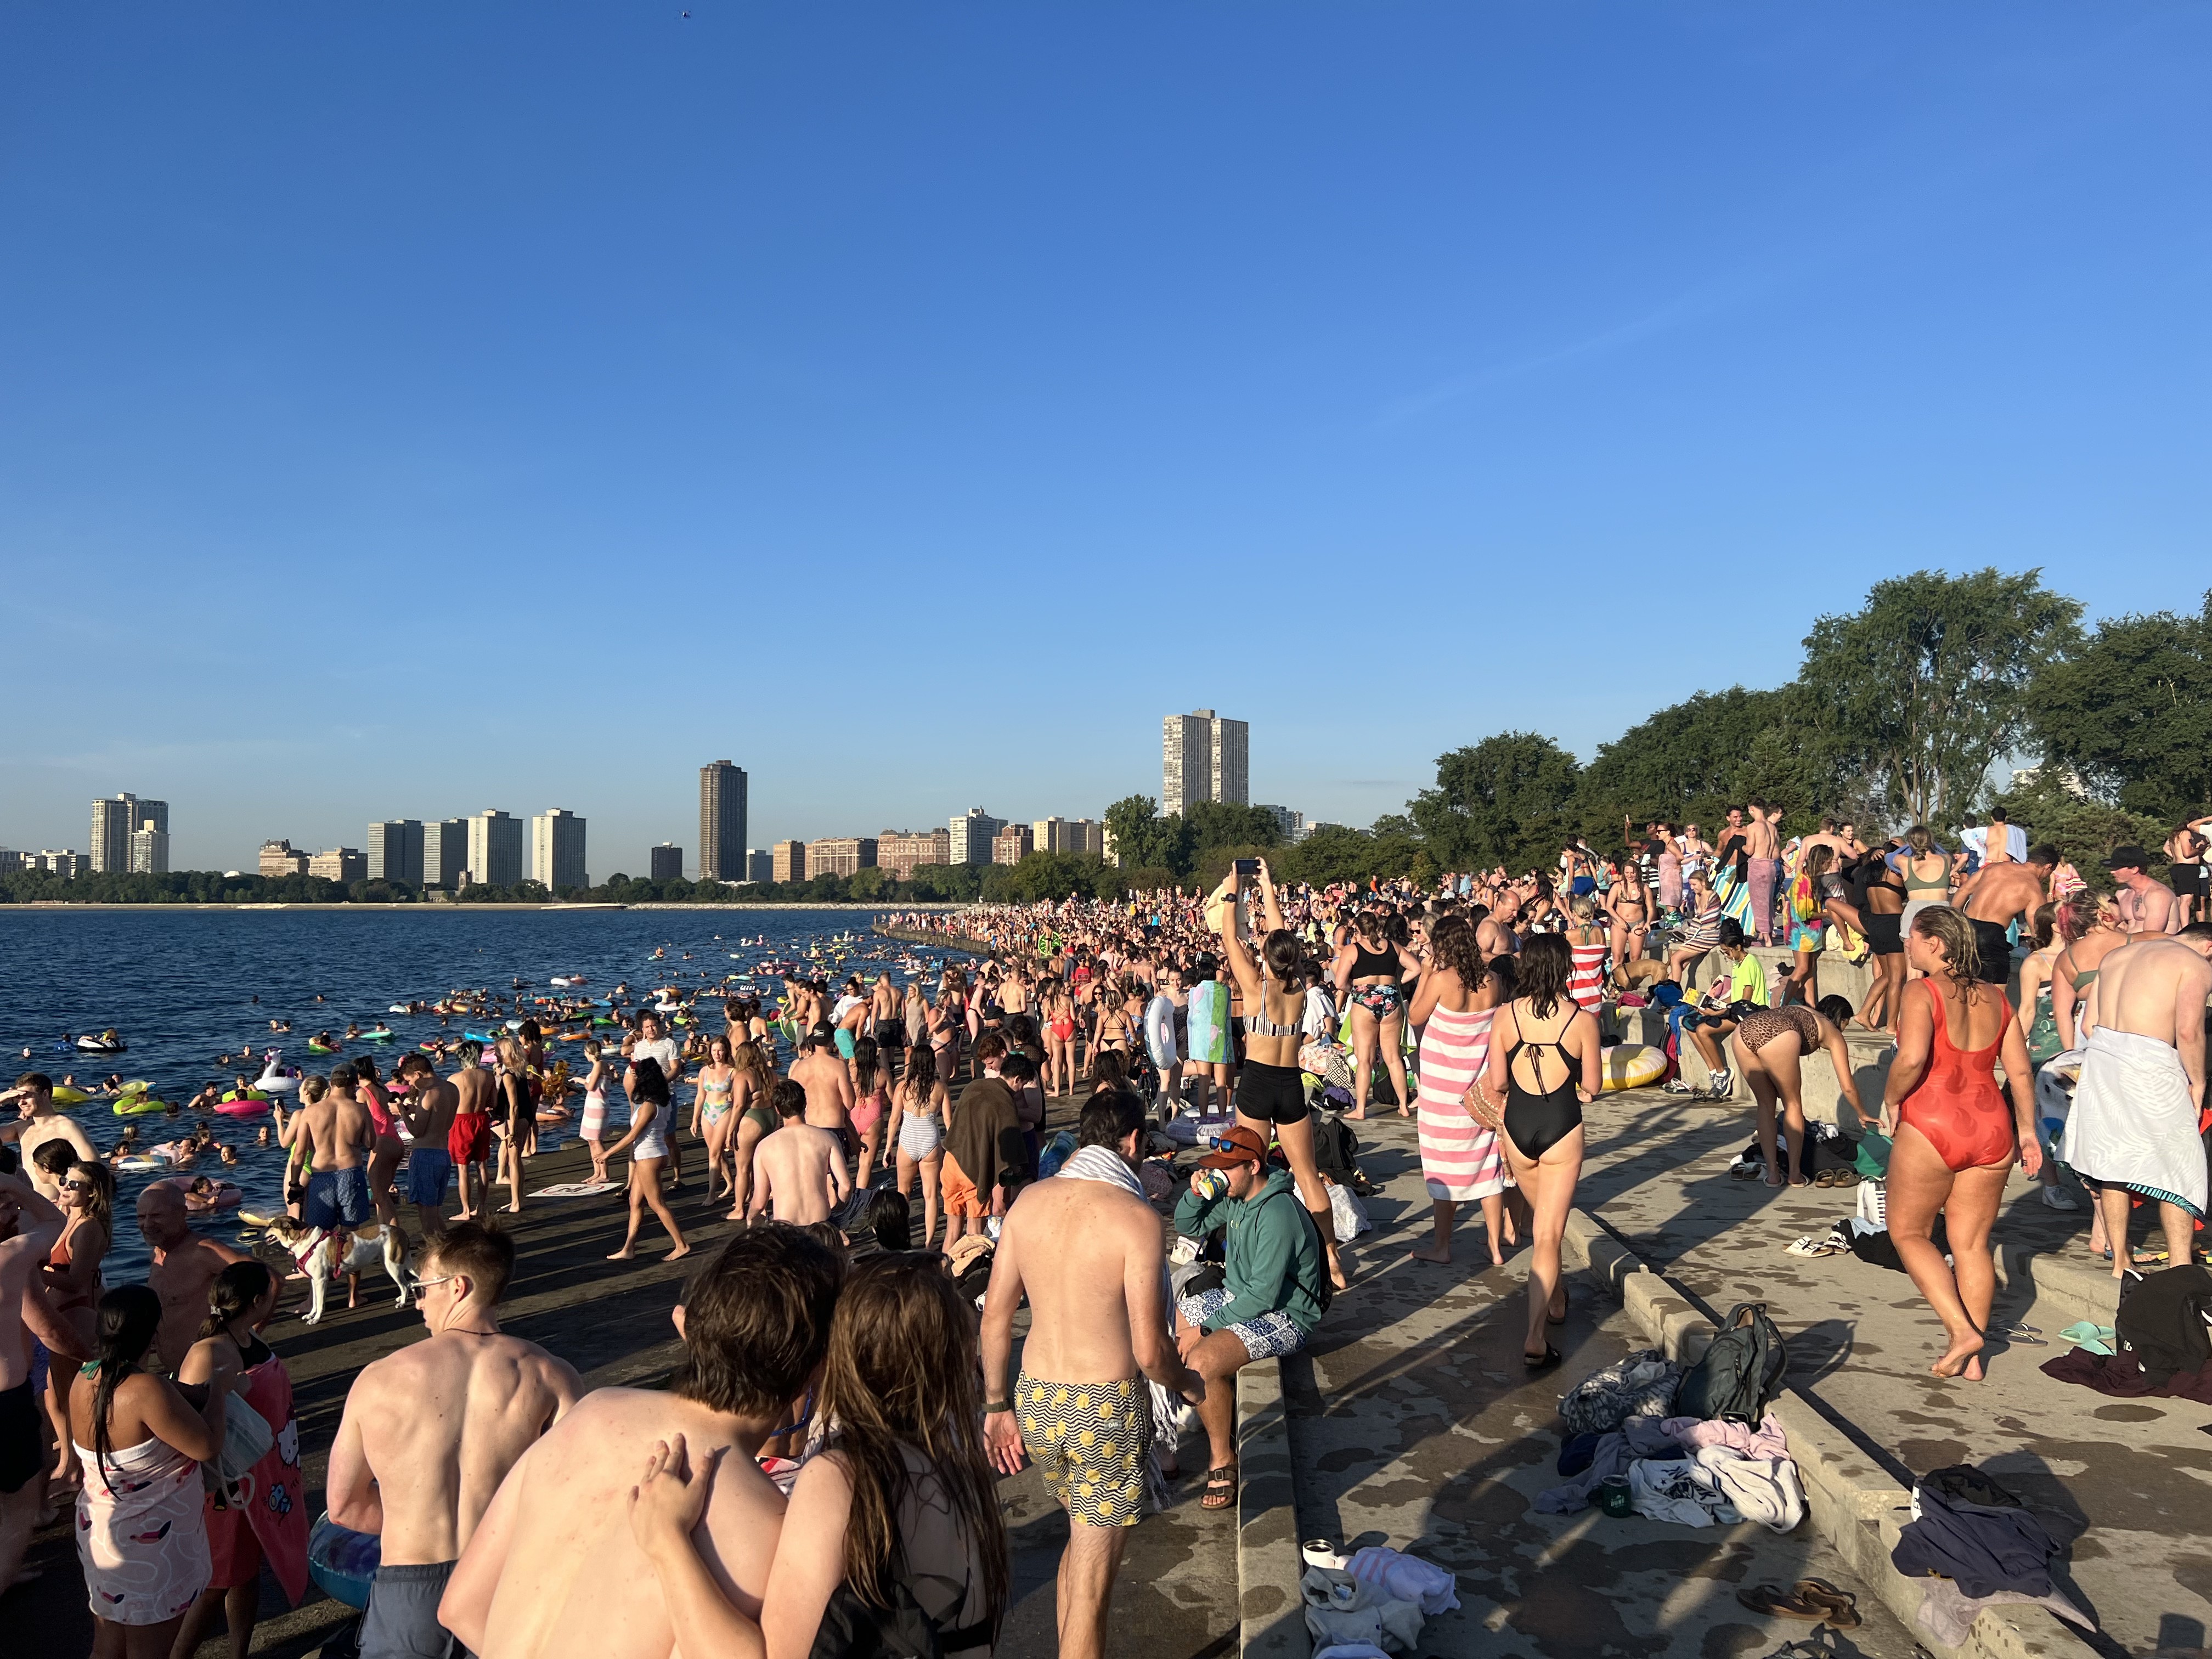 Many hundreds of people in swimsuits at a concrete beach in Chicago